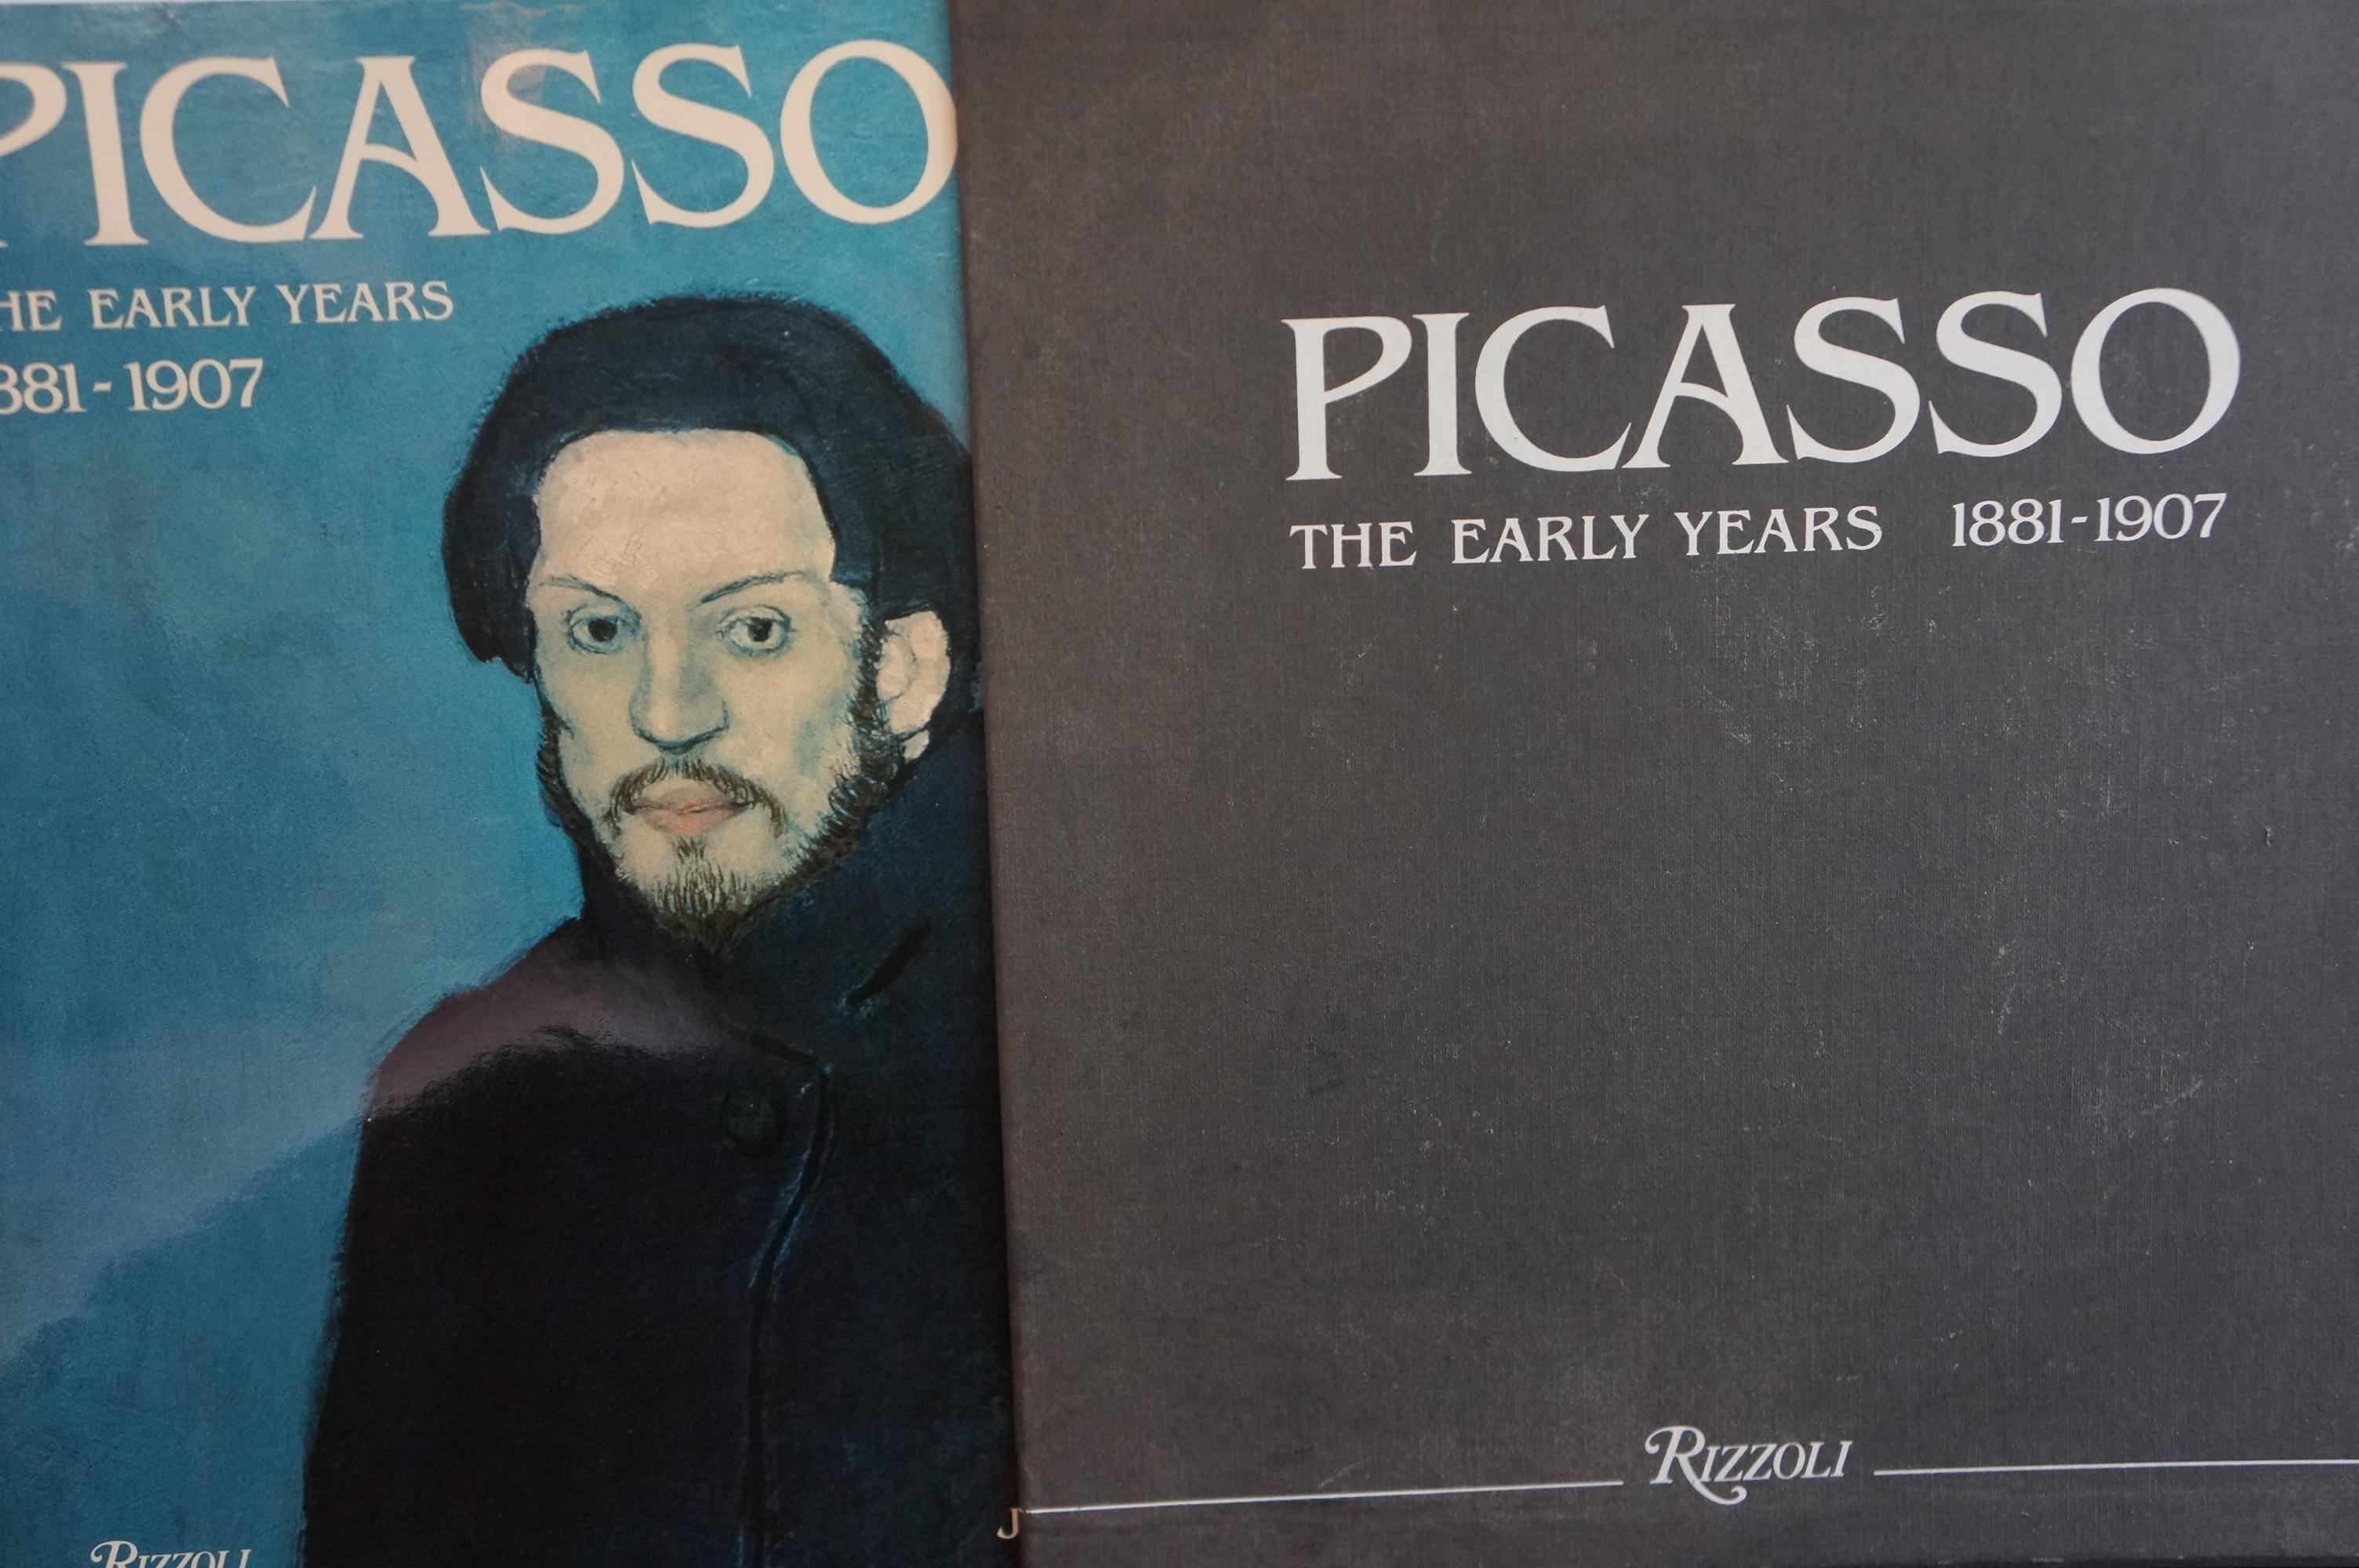 Pablo Picasso Book by Palau I Fabre detailing Picasso’s work from 1881 to 1907. Published by Rizzoli, New York in 1981. This hardcover book comes with a hardcover sleeve. The book itself is in great condition, the hard cover sleeve has some wear.